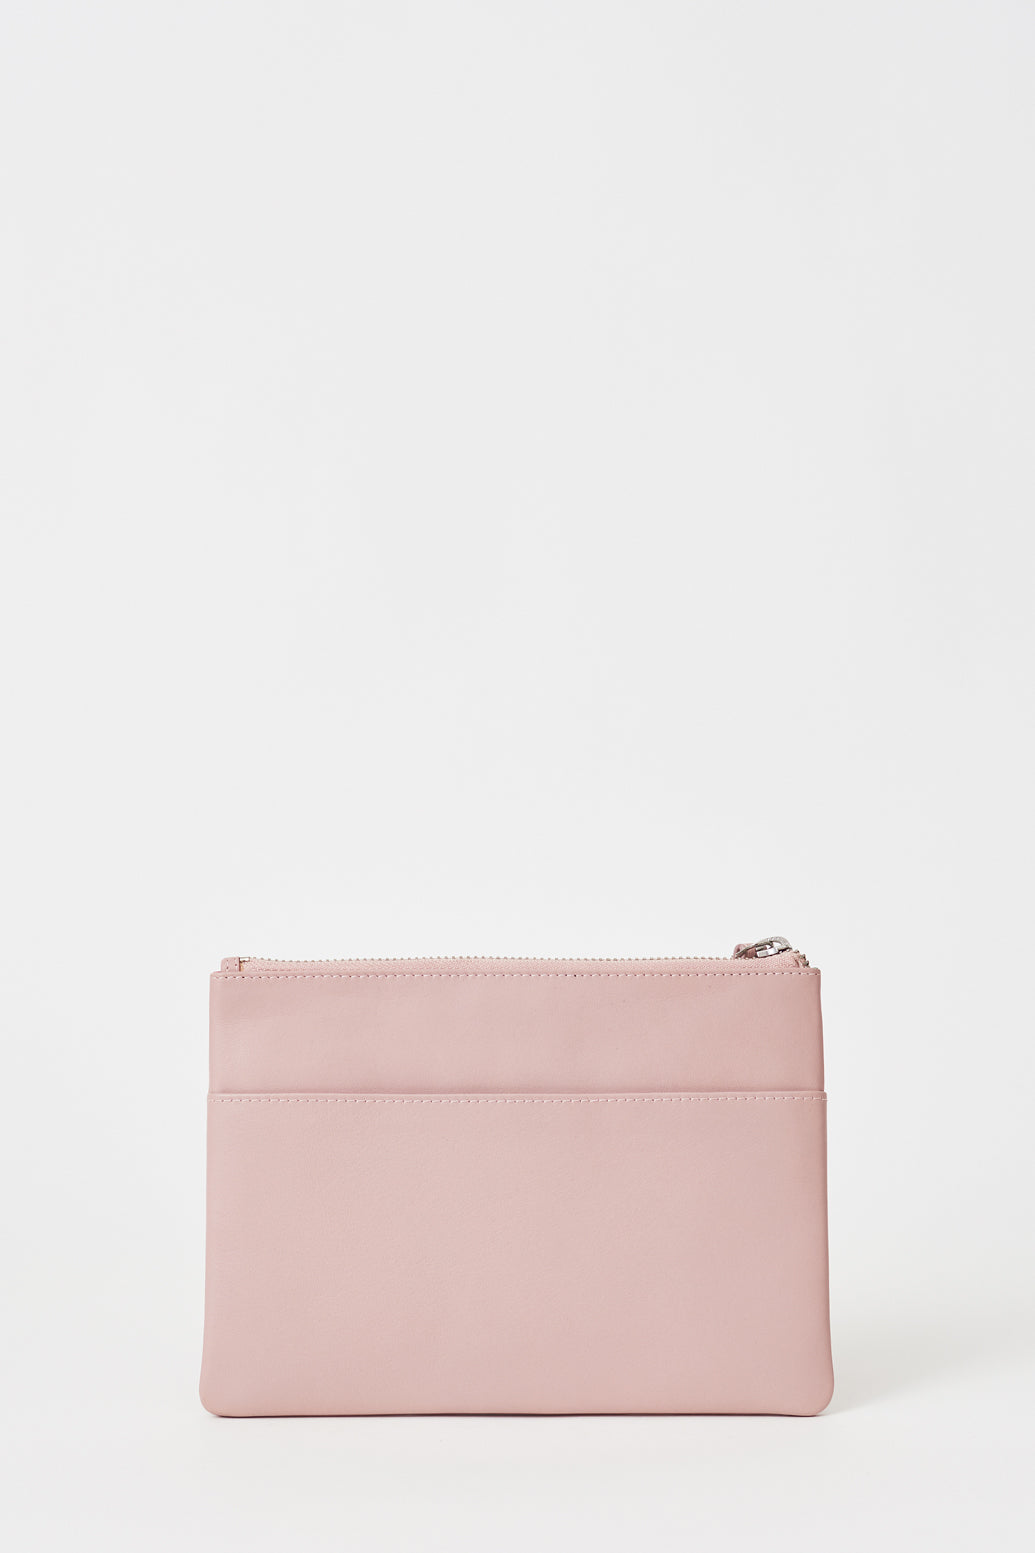 Furla Stacy Large Tote - Pale Pink | Lyst